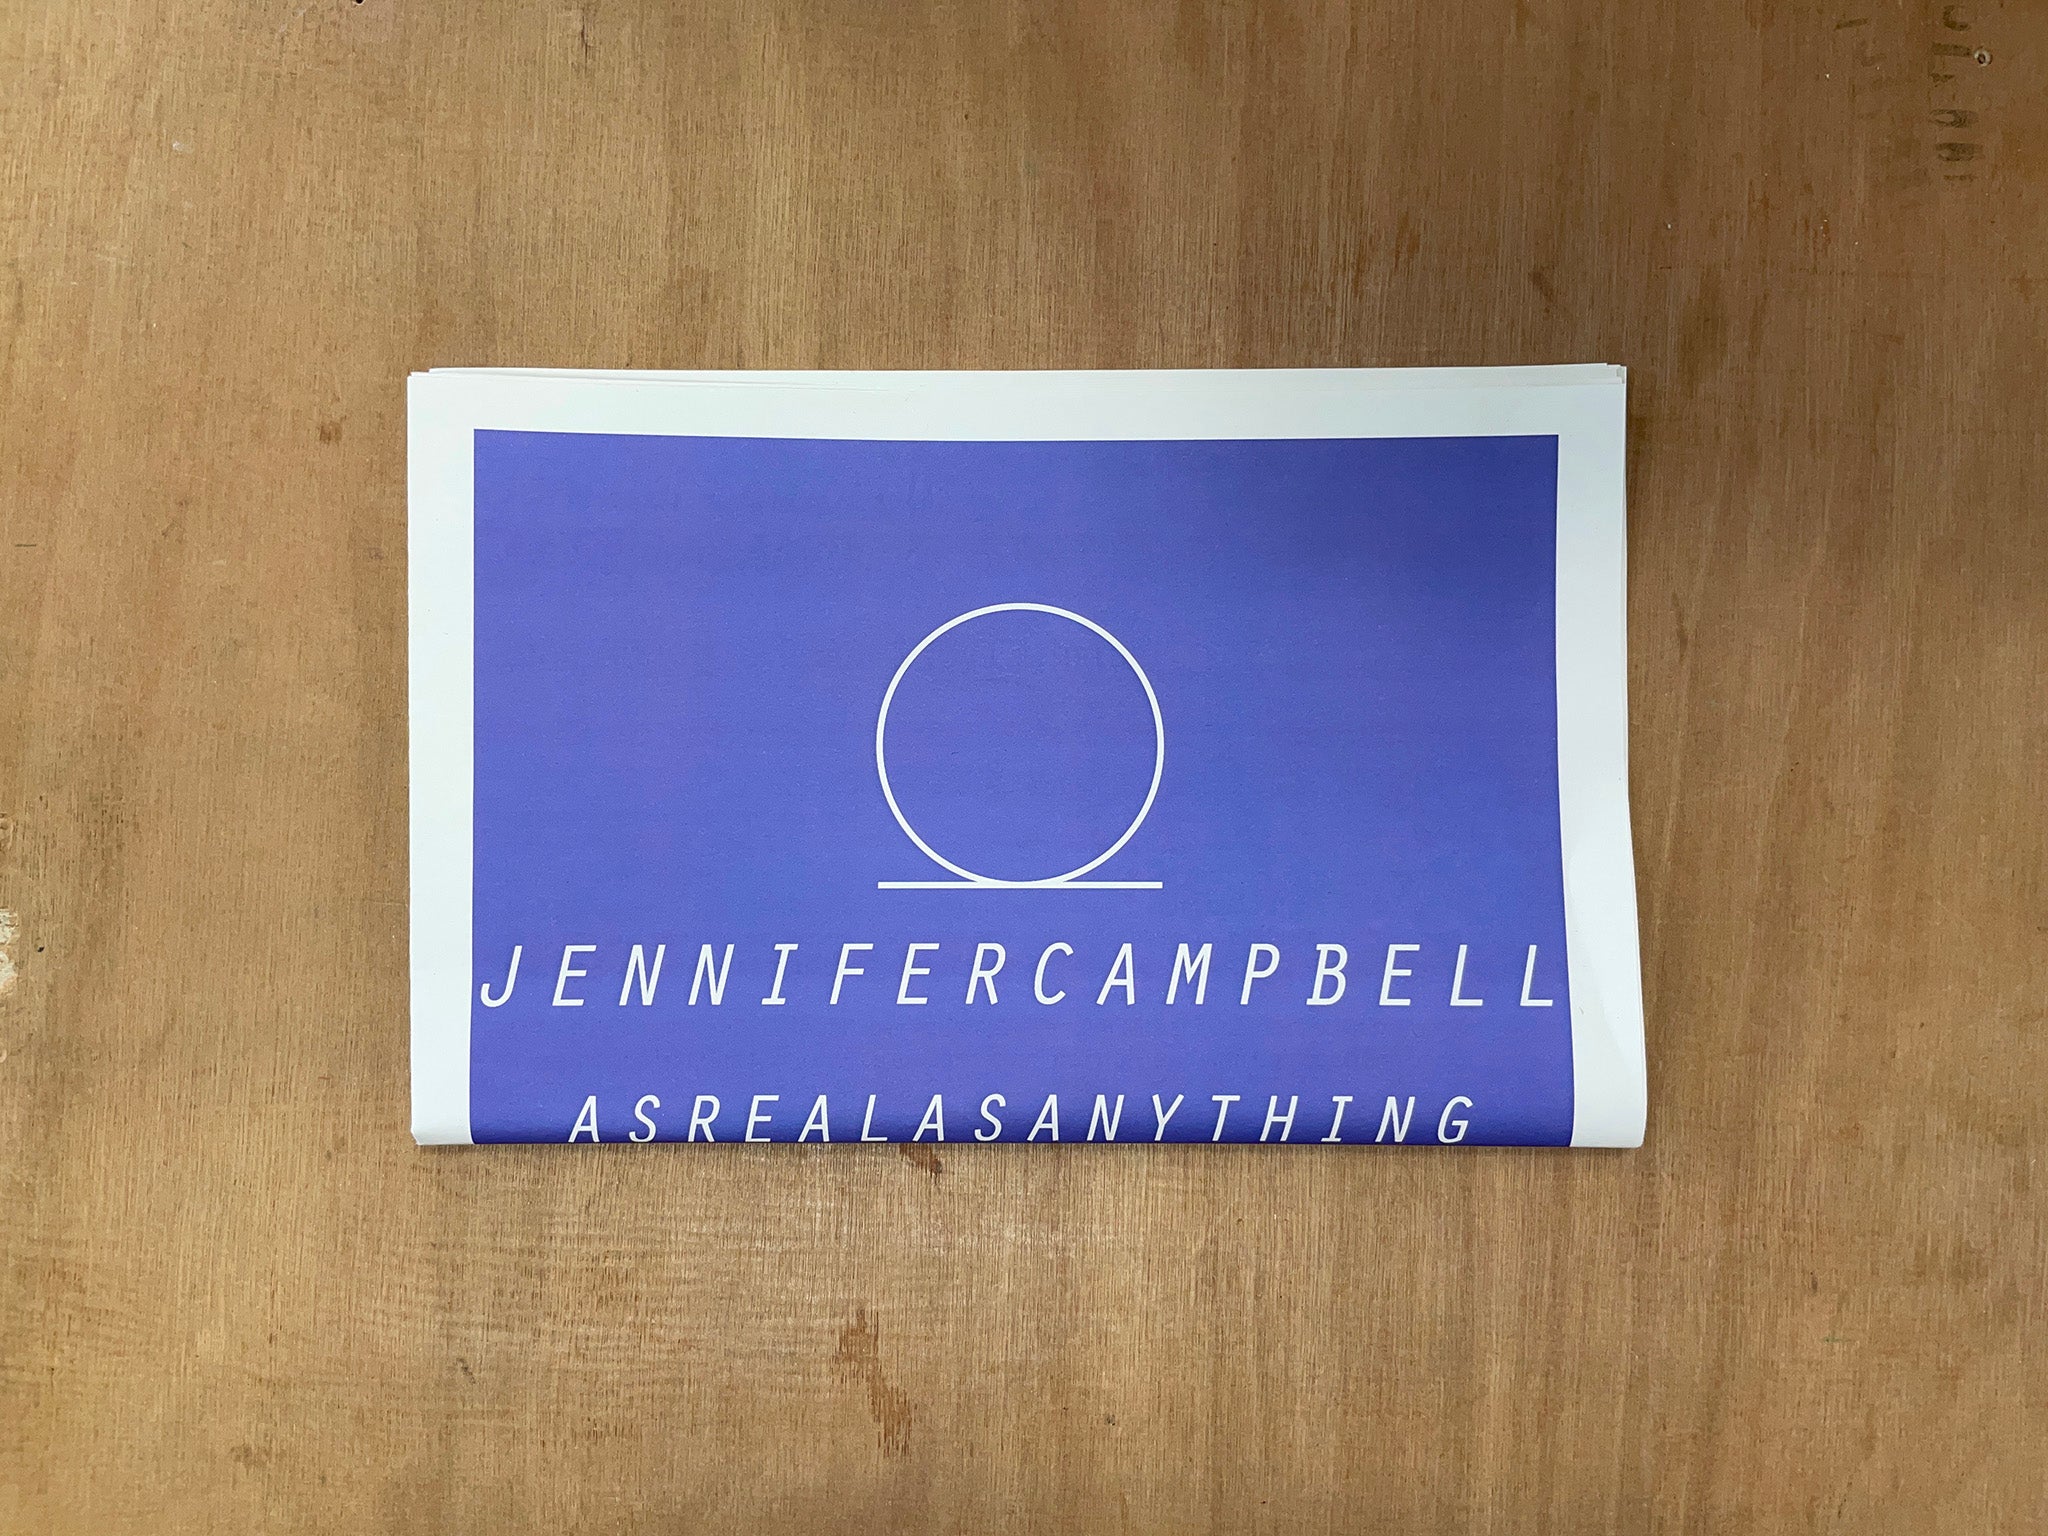 JENNIFER CAMPBELL: AS REAL AS ANYTHING by João Abbott-Gribben & Joy Camstein